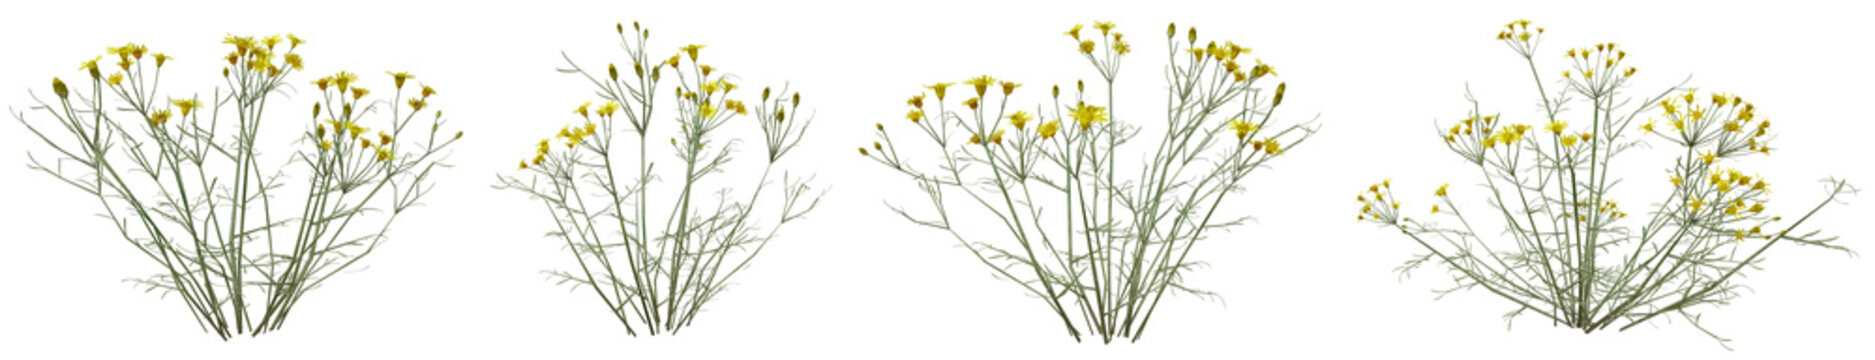 Set of Hoary Ragwort or Senecio erucifolius Yellow Wild Flower with isolated on transparent background. PNG file, 3D rendering illustration, Clip art and cut out	